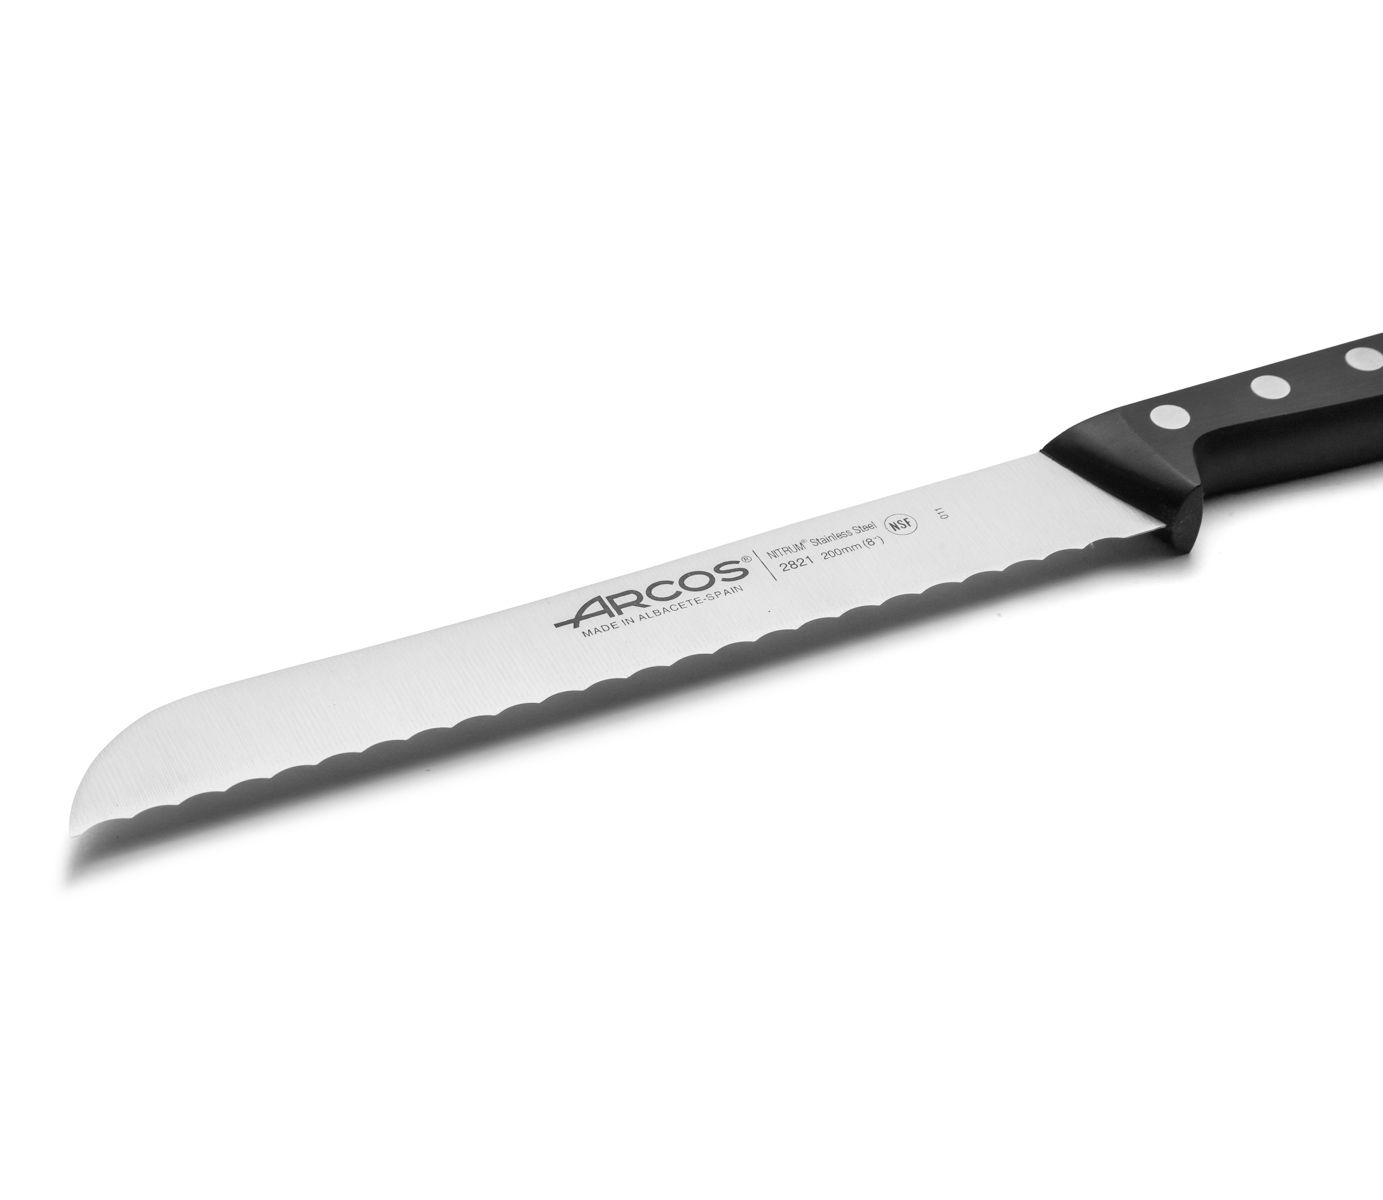 Arcos Universal Series 8 Inch Bread Knife - 282104